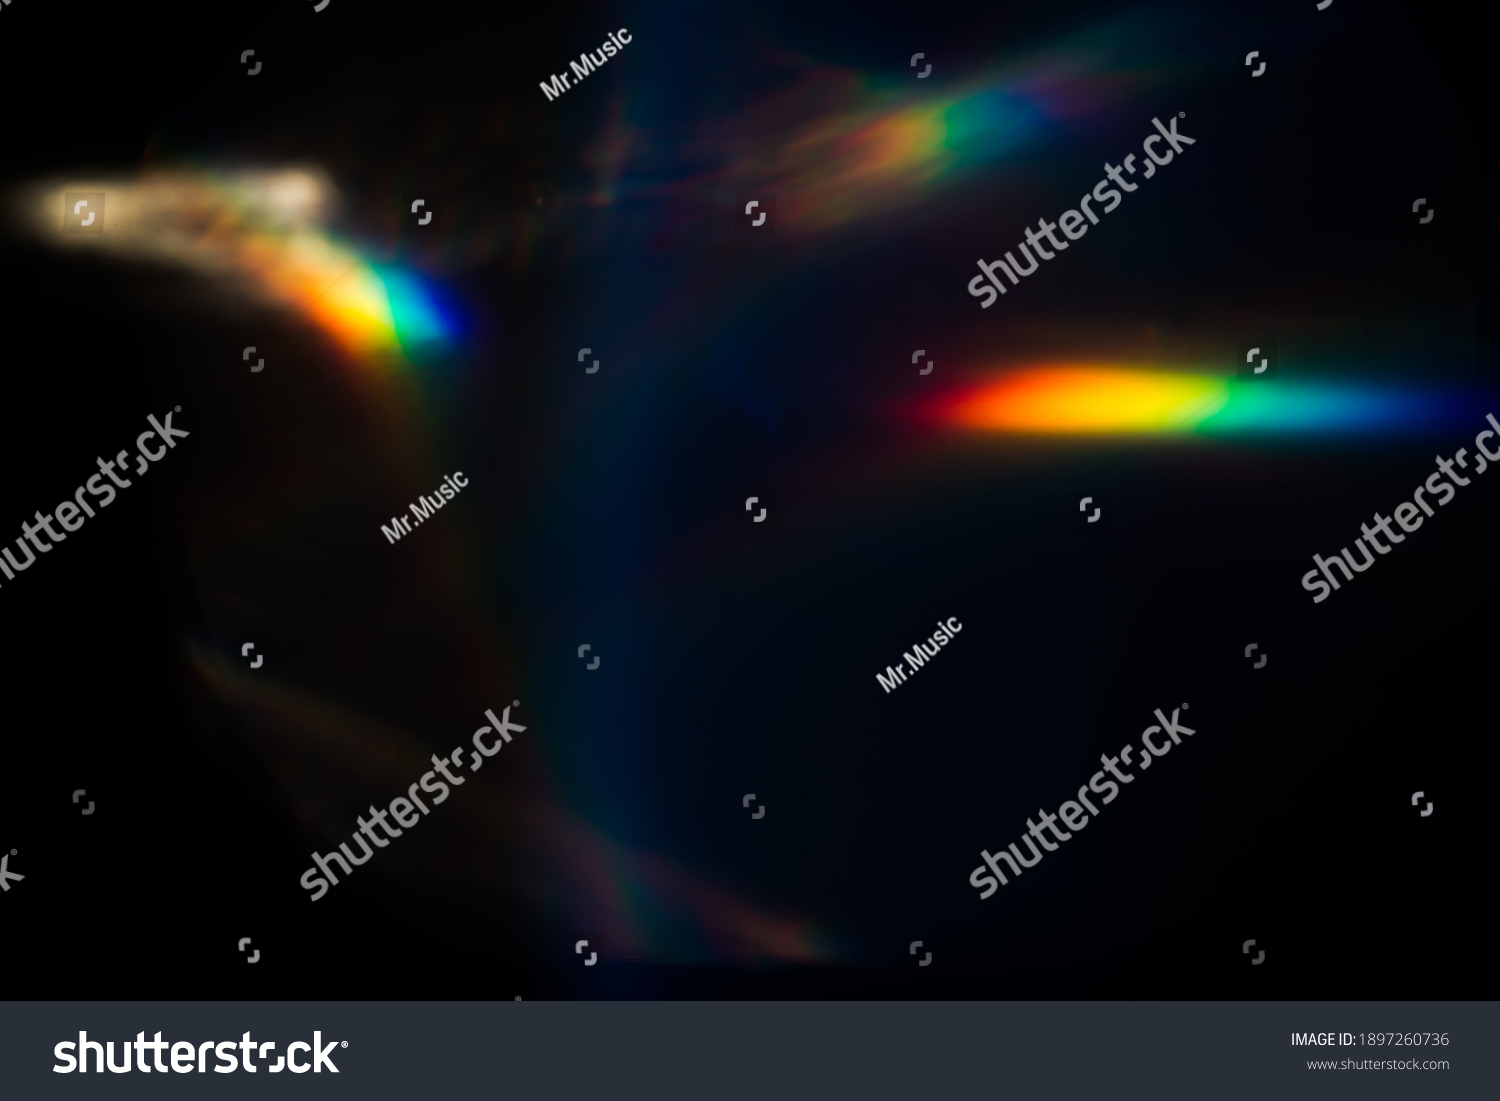 Abstract blurred background of colorful lens flare bokeh. #1897260736